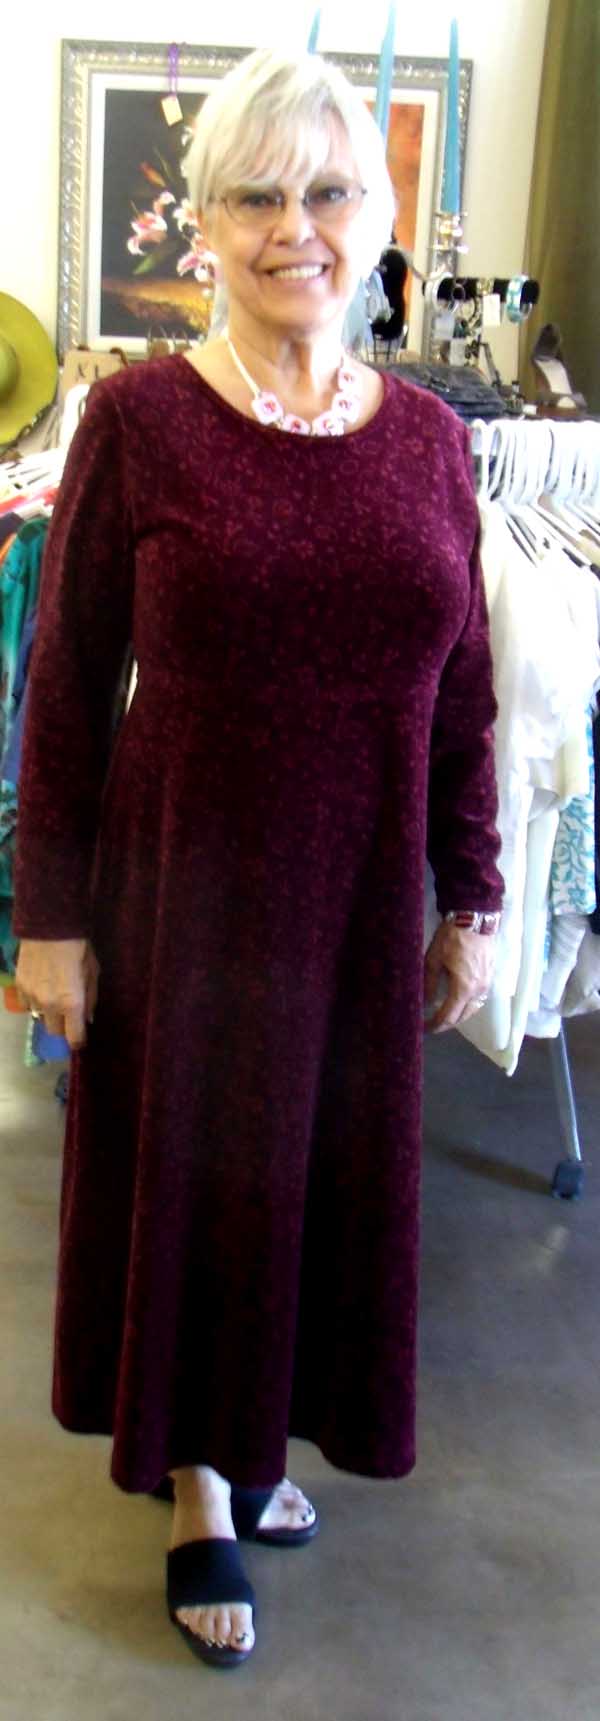 Joanne shows off a burgundy dress, highlighted by a five-piece fused glass necklace in pink, with magenta and red dichroic, and matching earrings